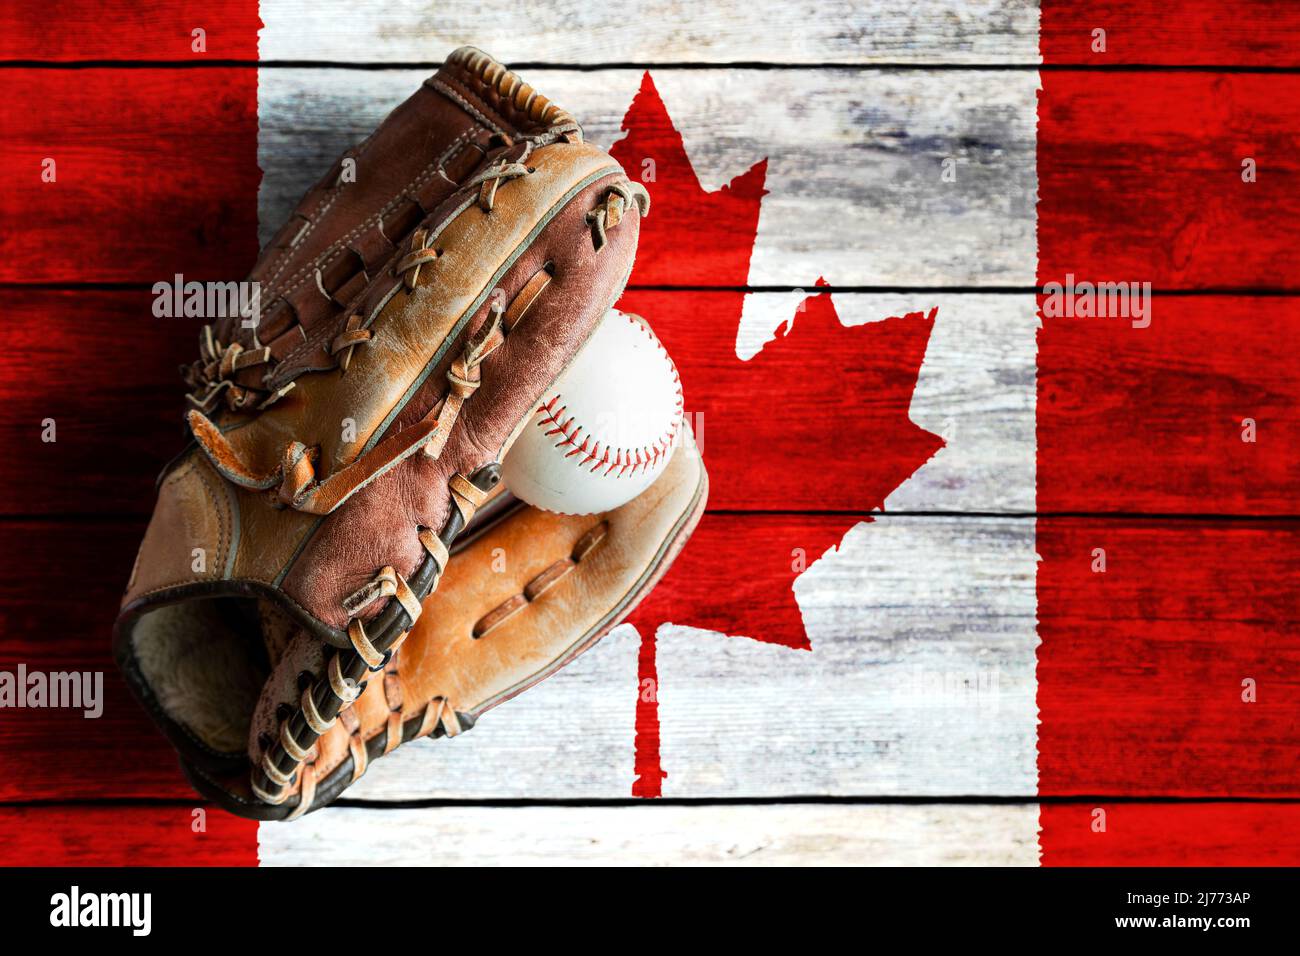 Leather baseball glove with ball on rustic wooden background with painted Canadian flag and copy space. Canada is one of the world's top baseball nati Stock Photo